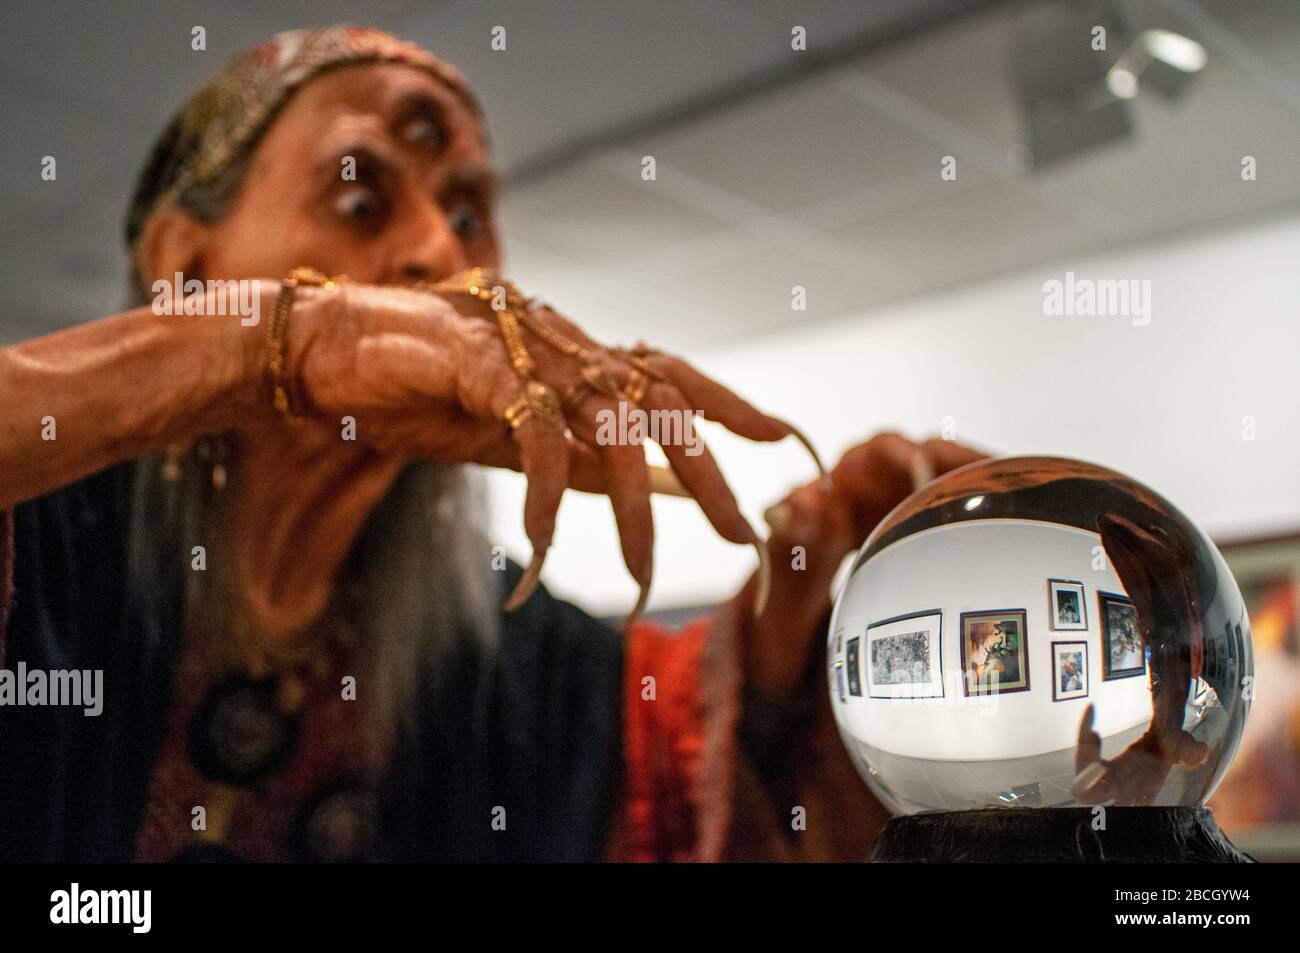 Witch fortune teller with crystal ball portrait  Society of Illustrators building, an art organization on the Upper East Side of Manhattan, New York C Stock Photo